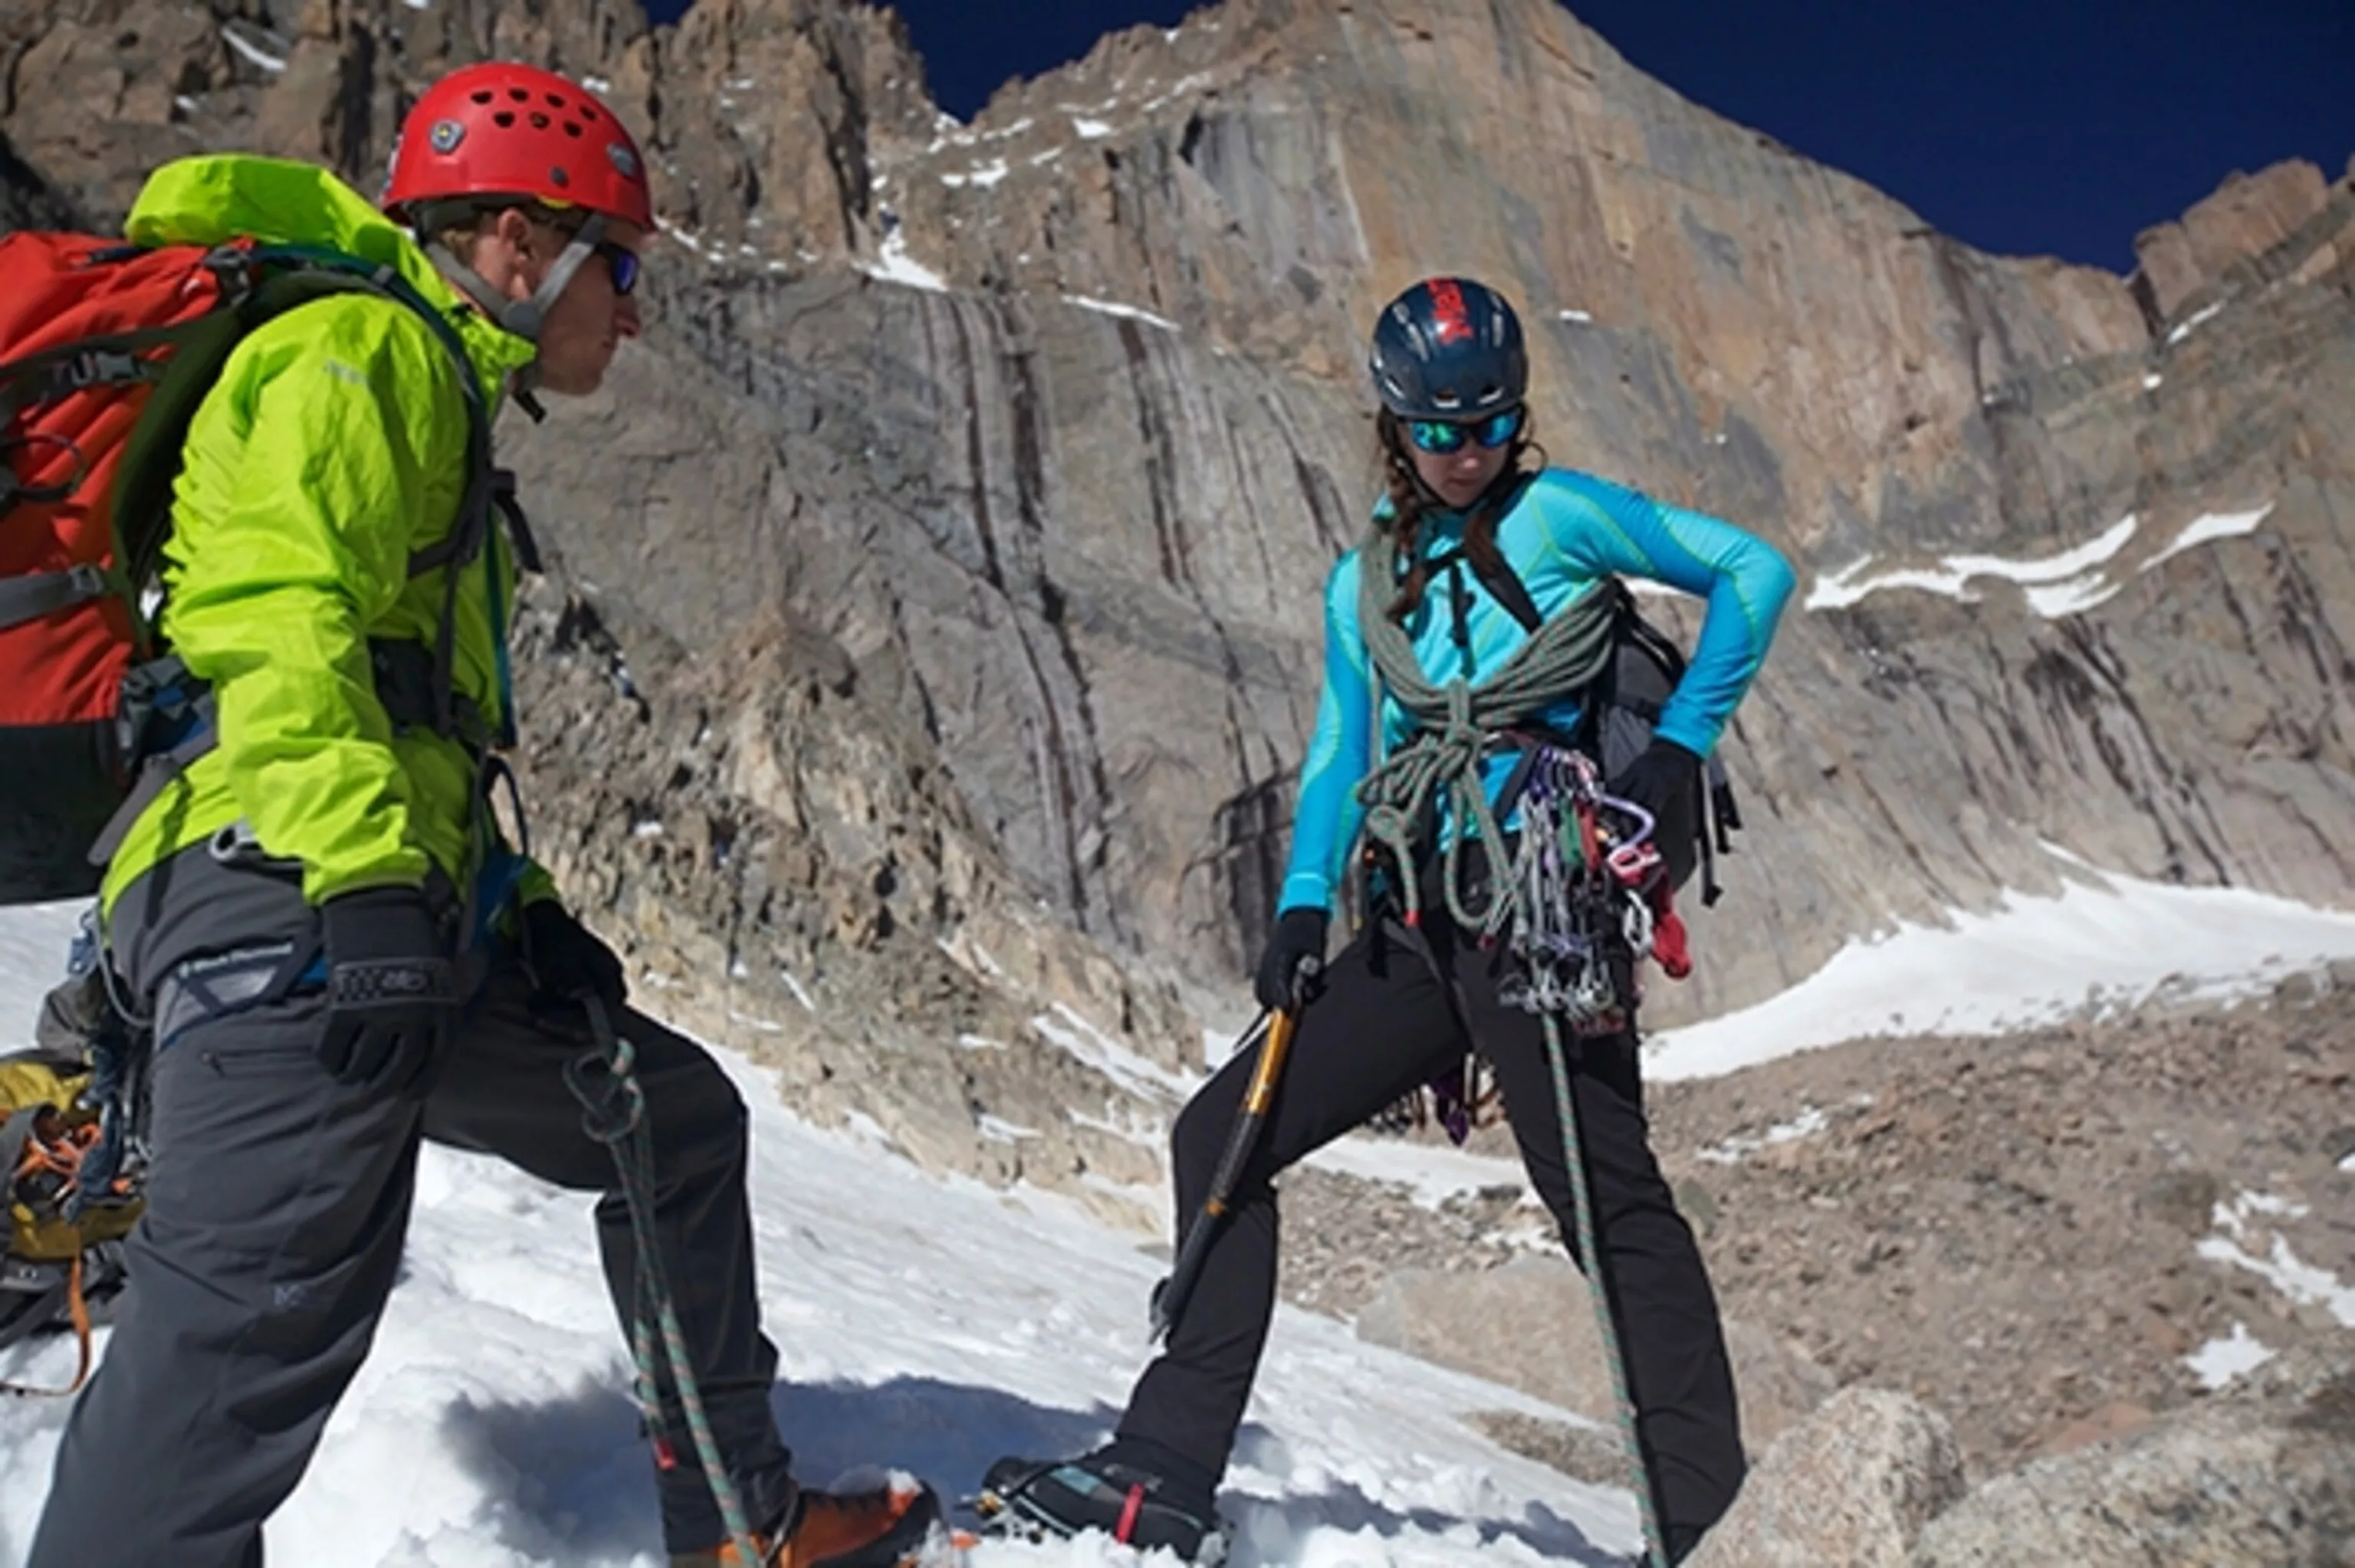 Colorado Mountain School in USA, North America | Mountaineering,Climbing - Rated 1.1